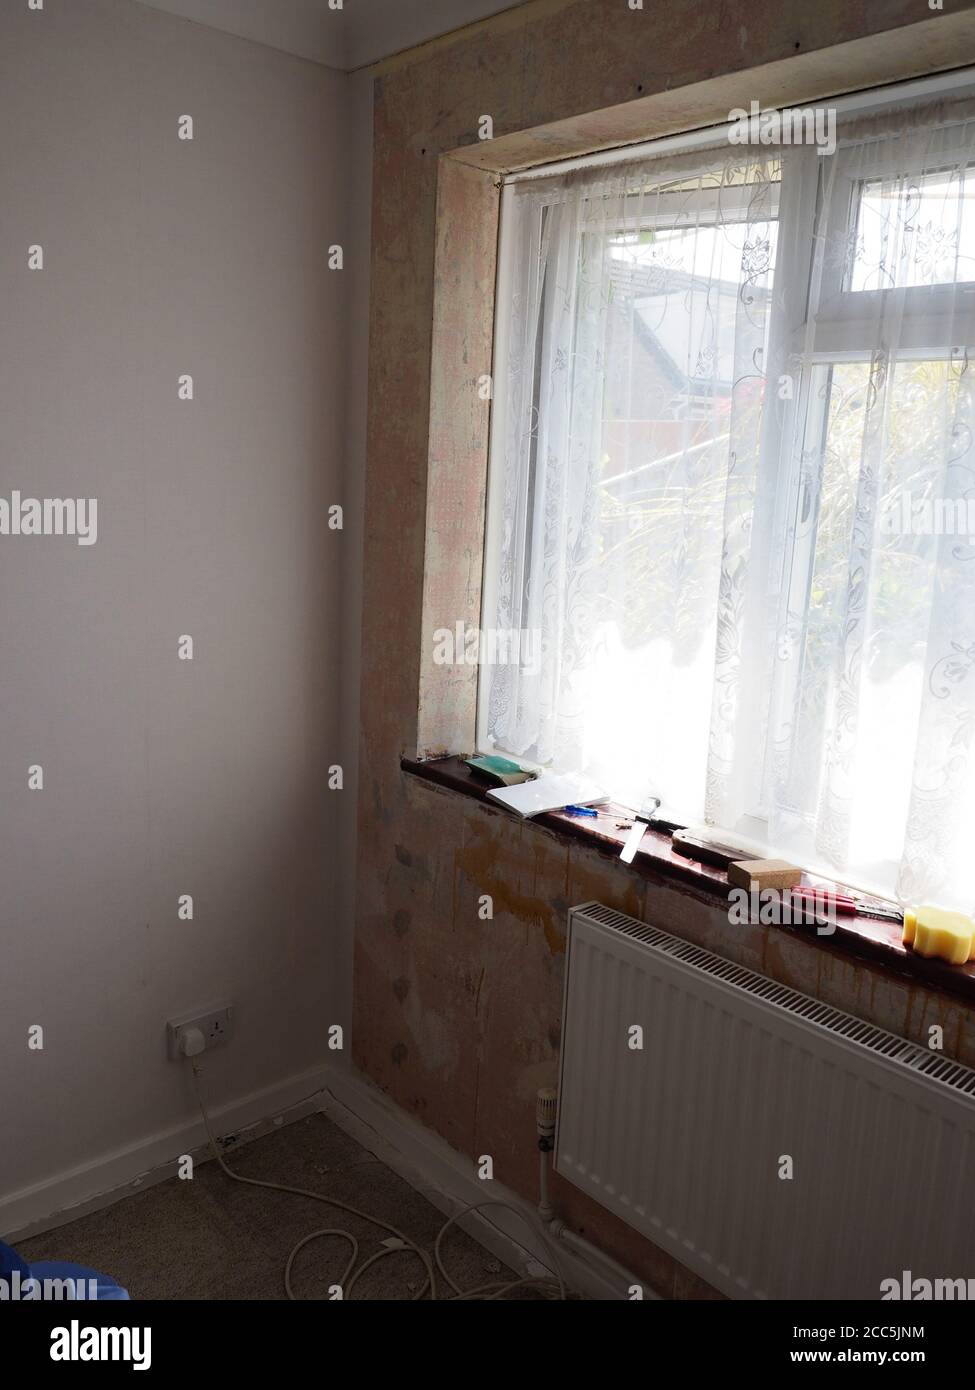 a room being decorated showing partly papered walls and a tools on windowledge Stock Photo